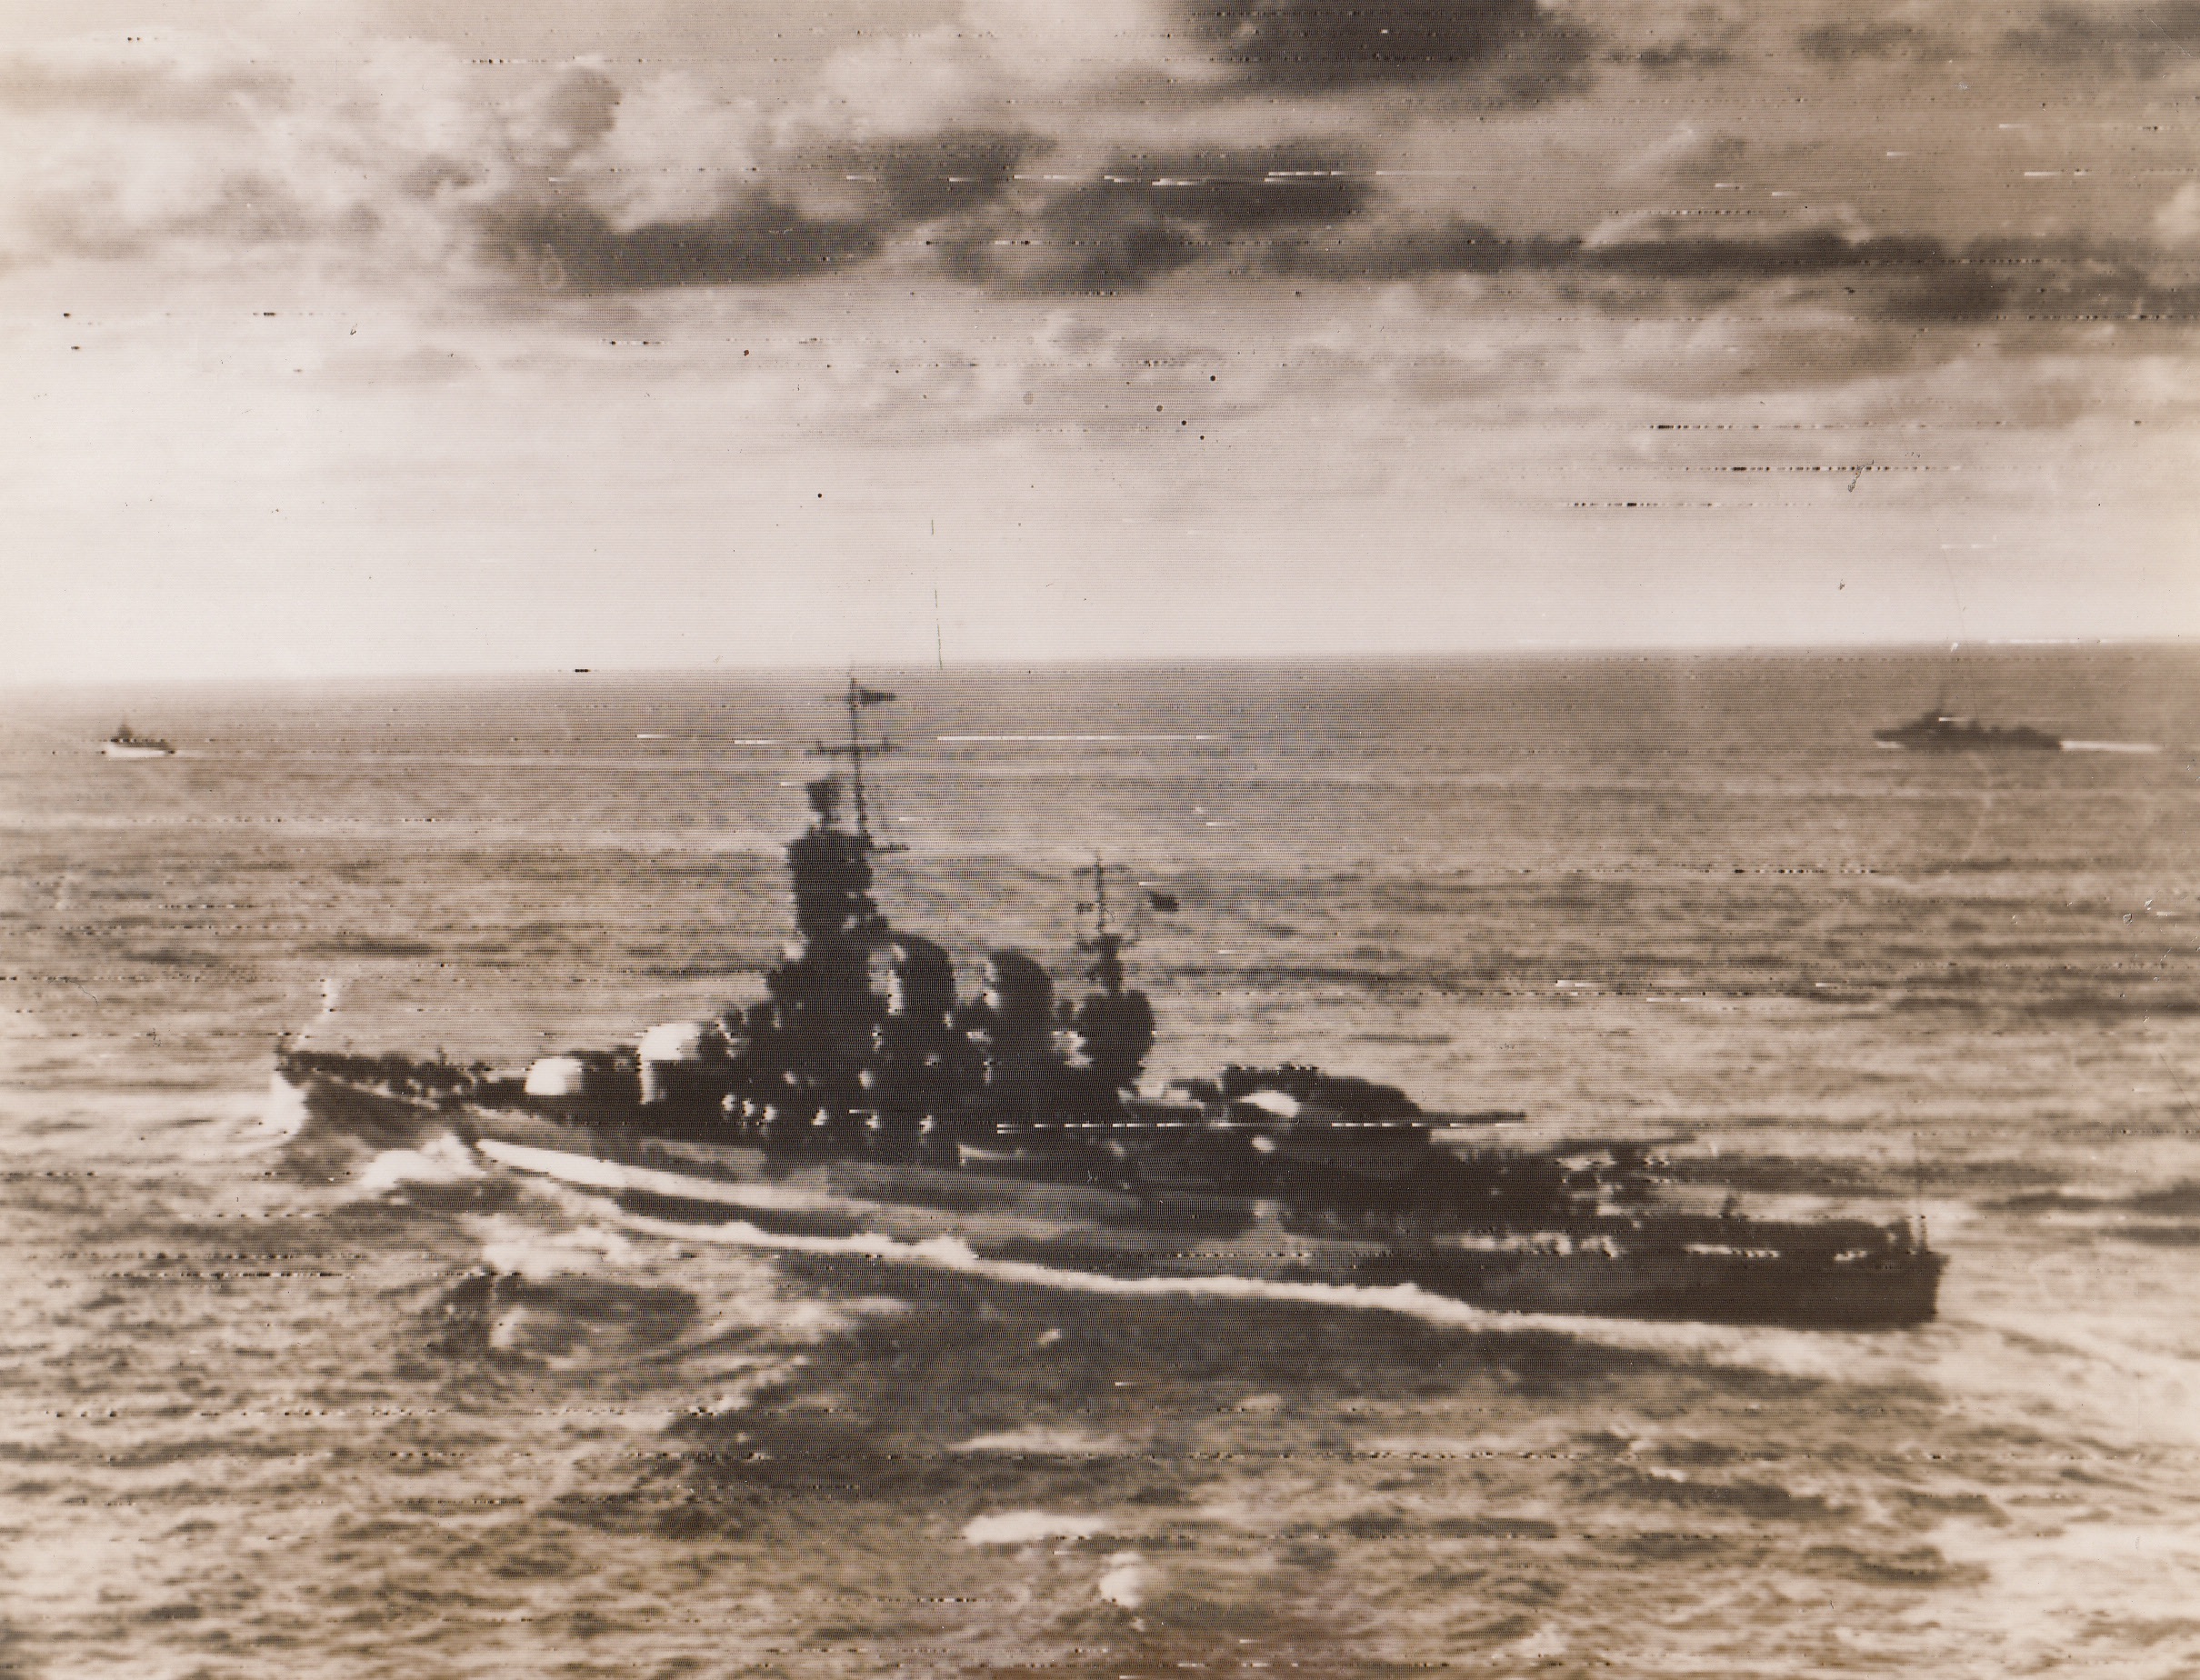 Italian R Craft Reach Allied Port, 9/18/1943. An Italian battleship (foreground) of the Littoria class, and two destroyers of Italy’s Navy, reach an Allied port in the Eastern Mediterranean, escorted by units of the Royal navy. An effective RAF umbrella protected the sea lanes from the air.  9/18/43 Credit (ACME RadioPhoto);